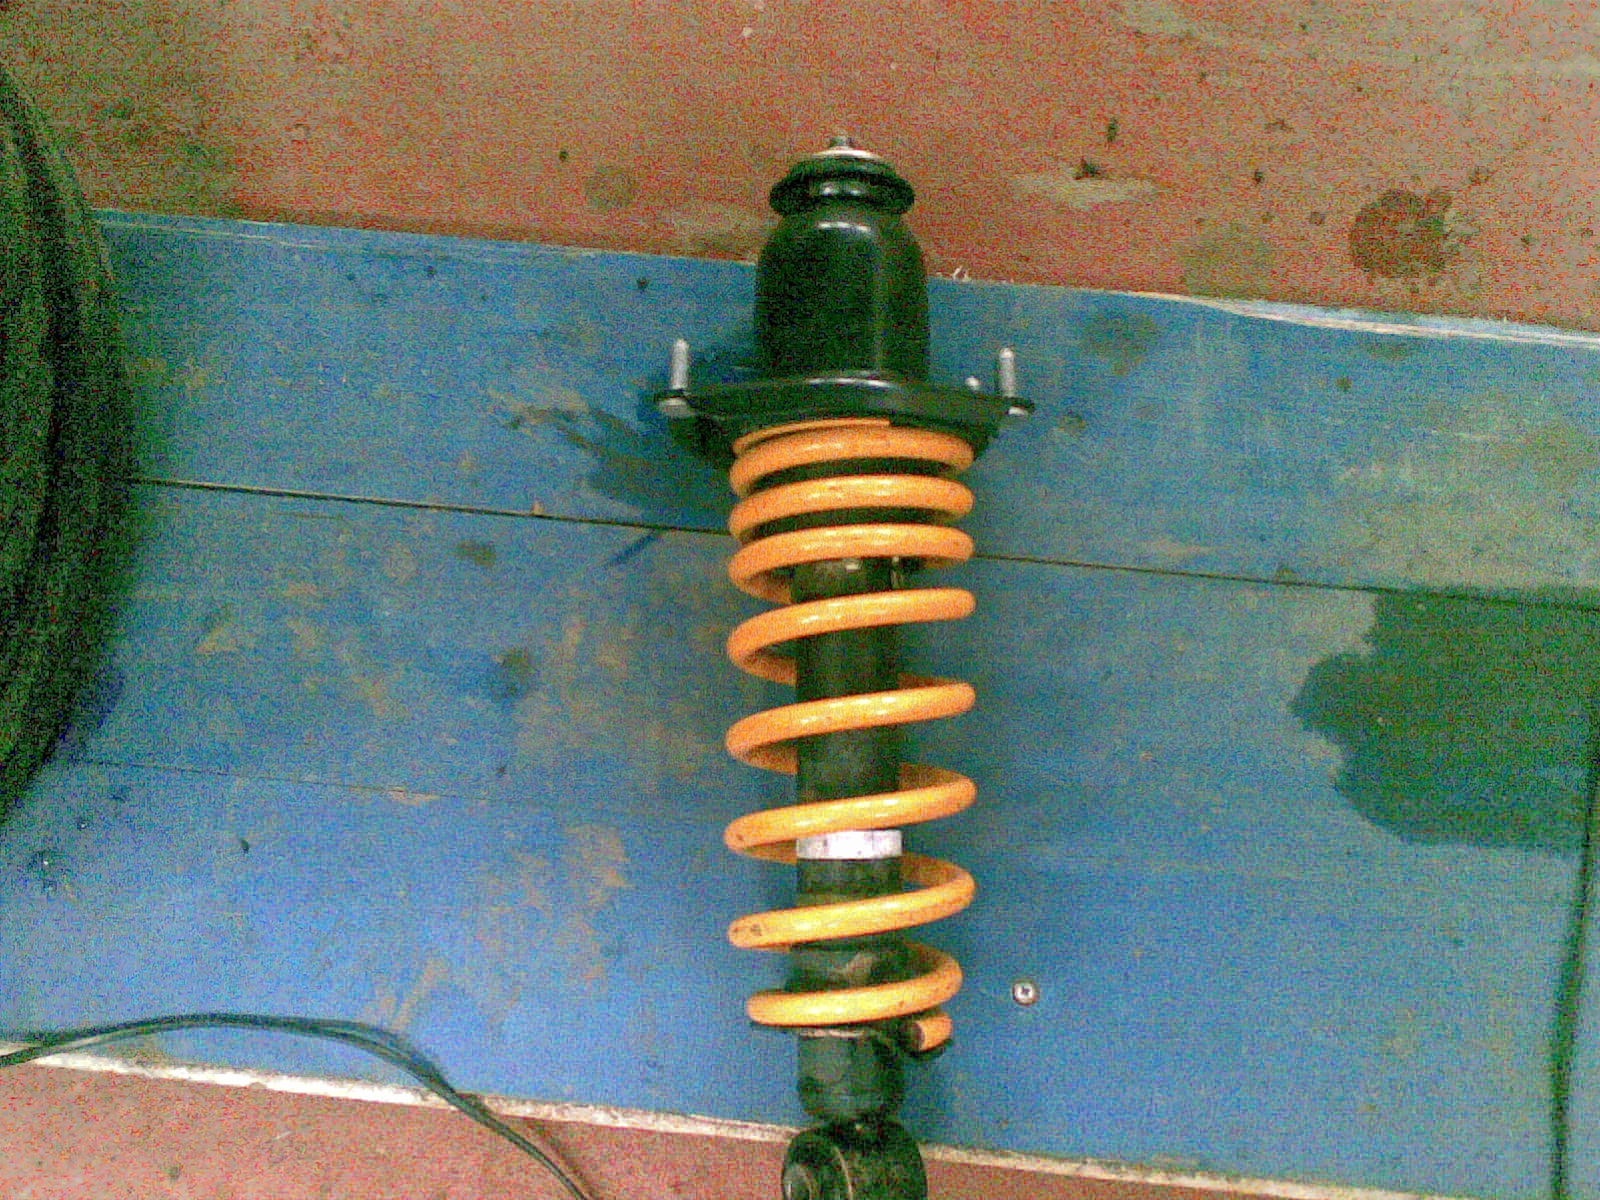 Replaced the factory springs with more elastic springs with an understatement The racks themselves were left by relatives  factory ones - Toyota Caldina 20 L 2005